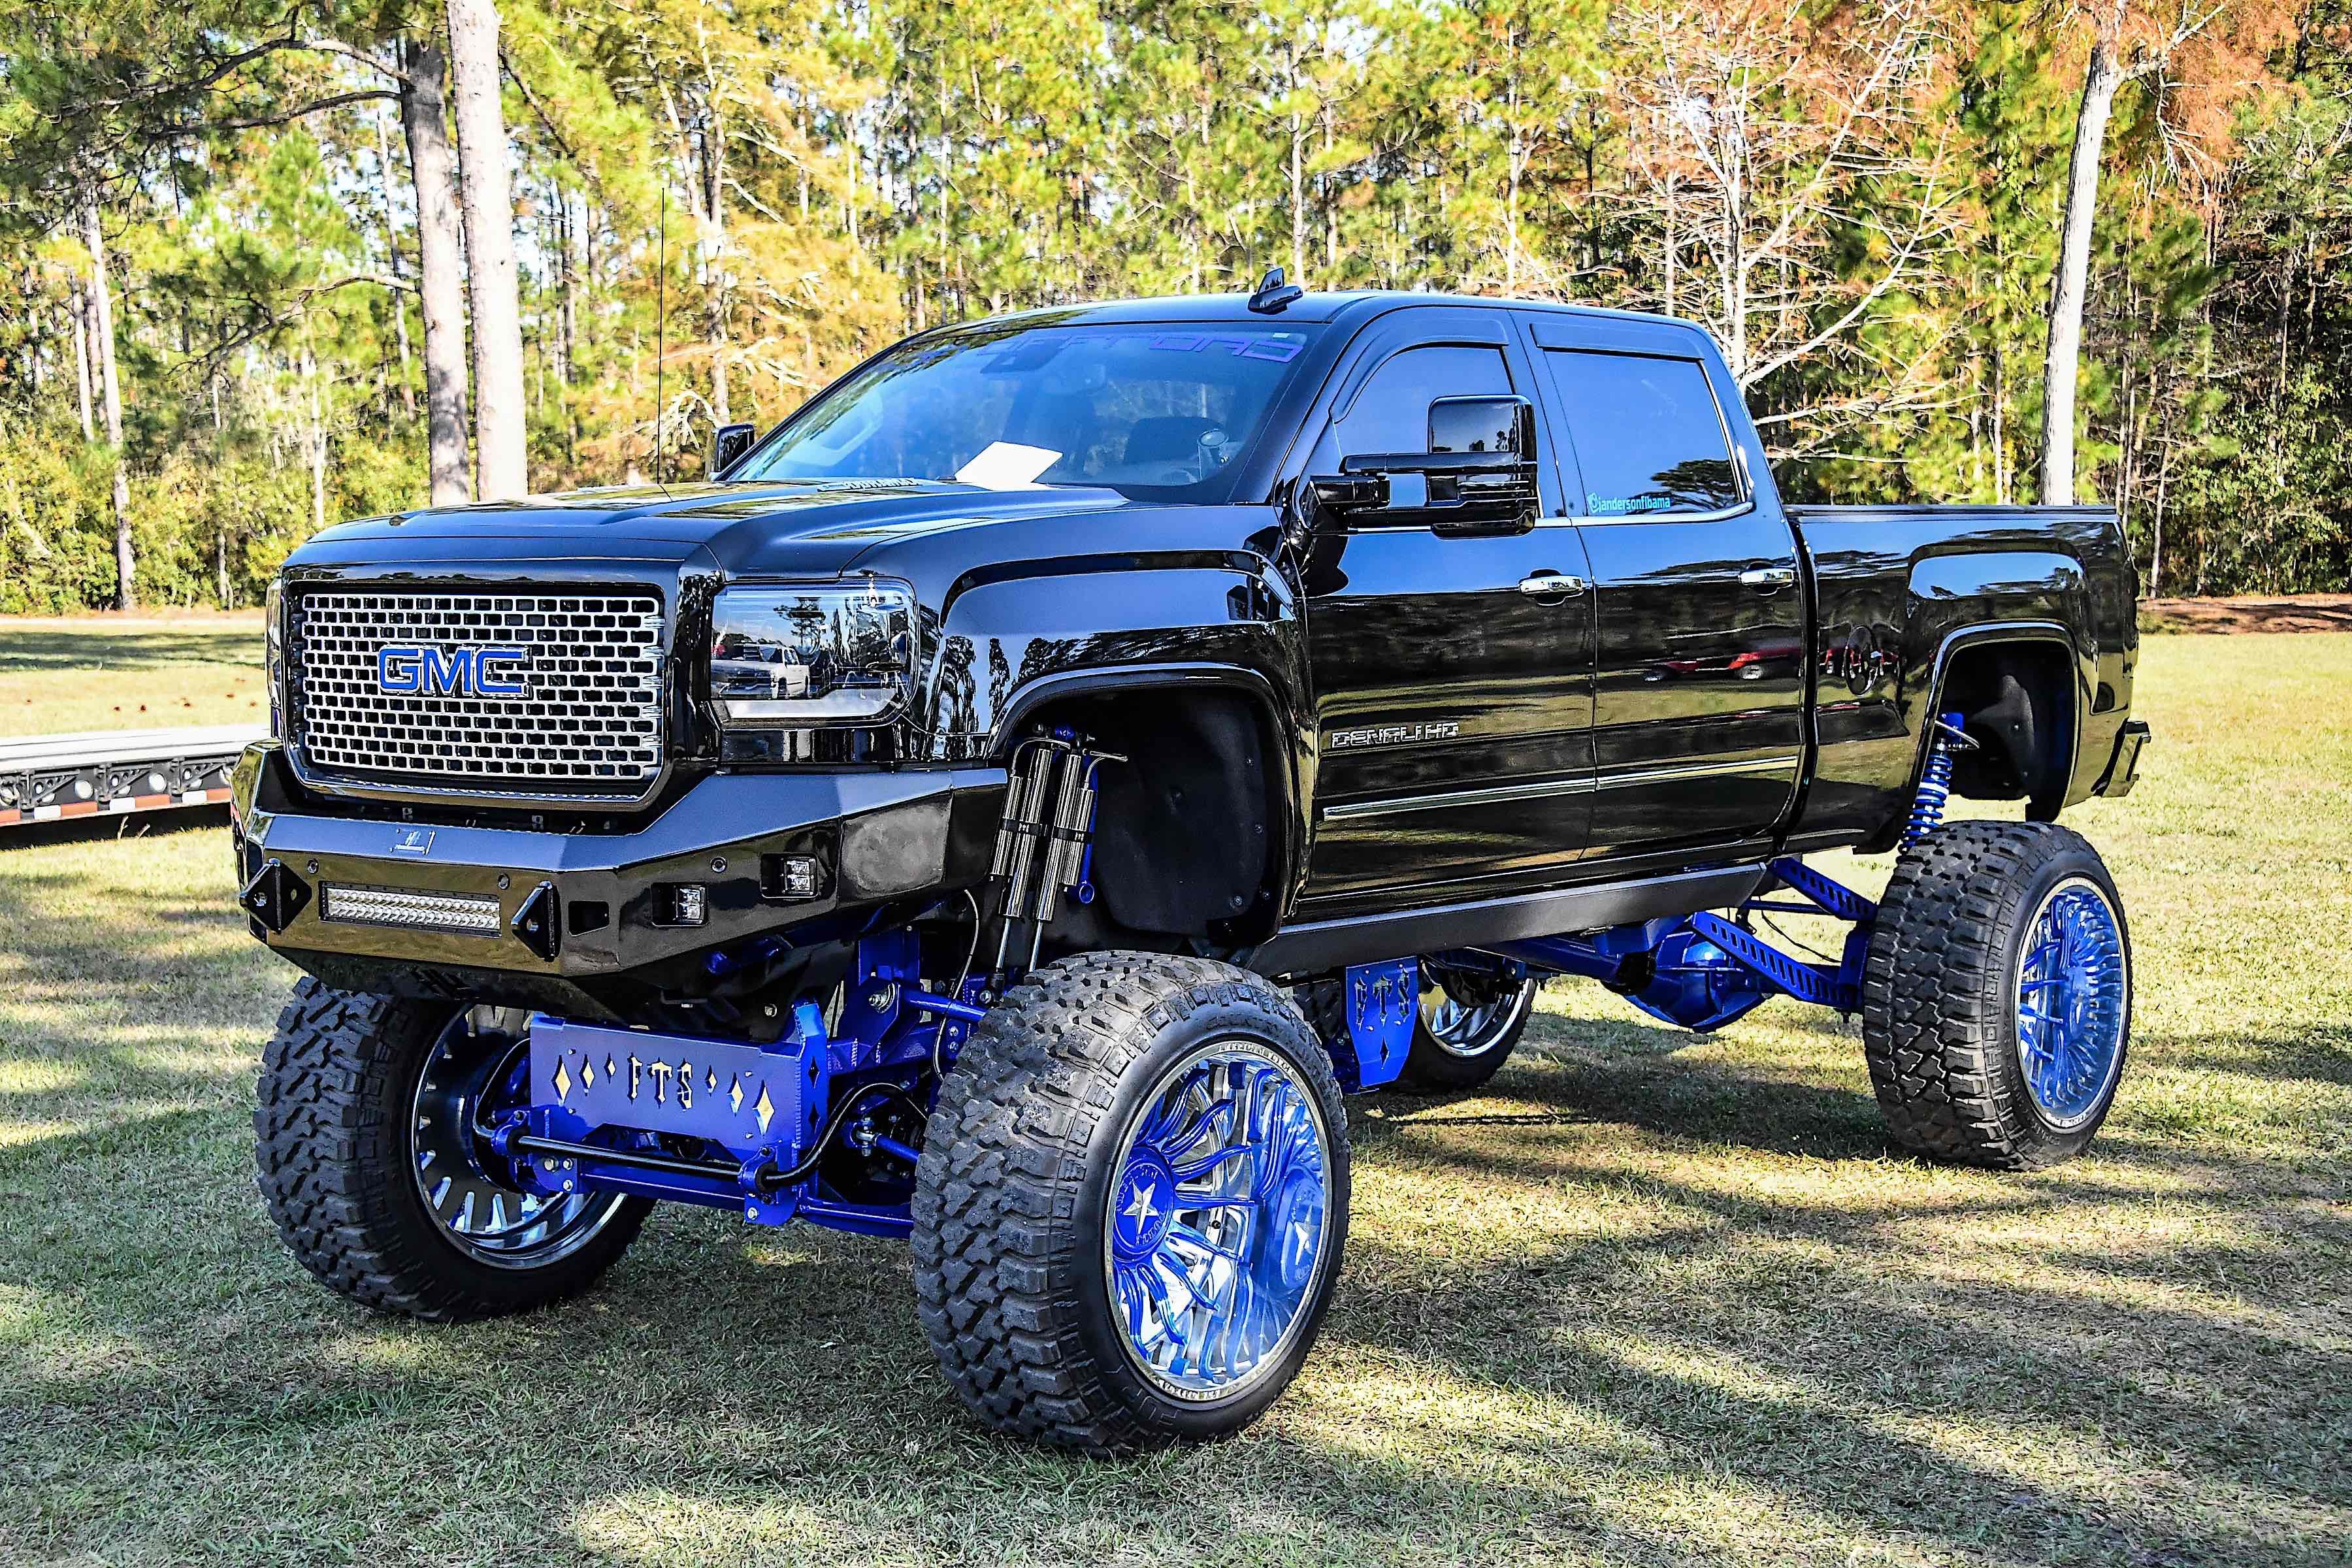 A lifted GMC truck